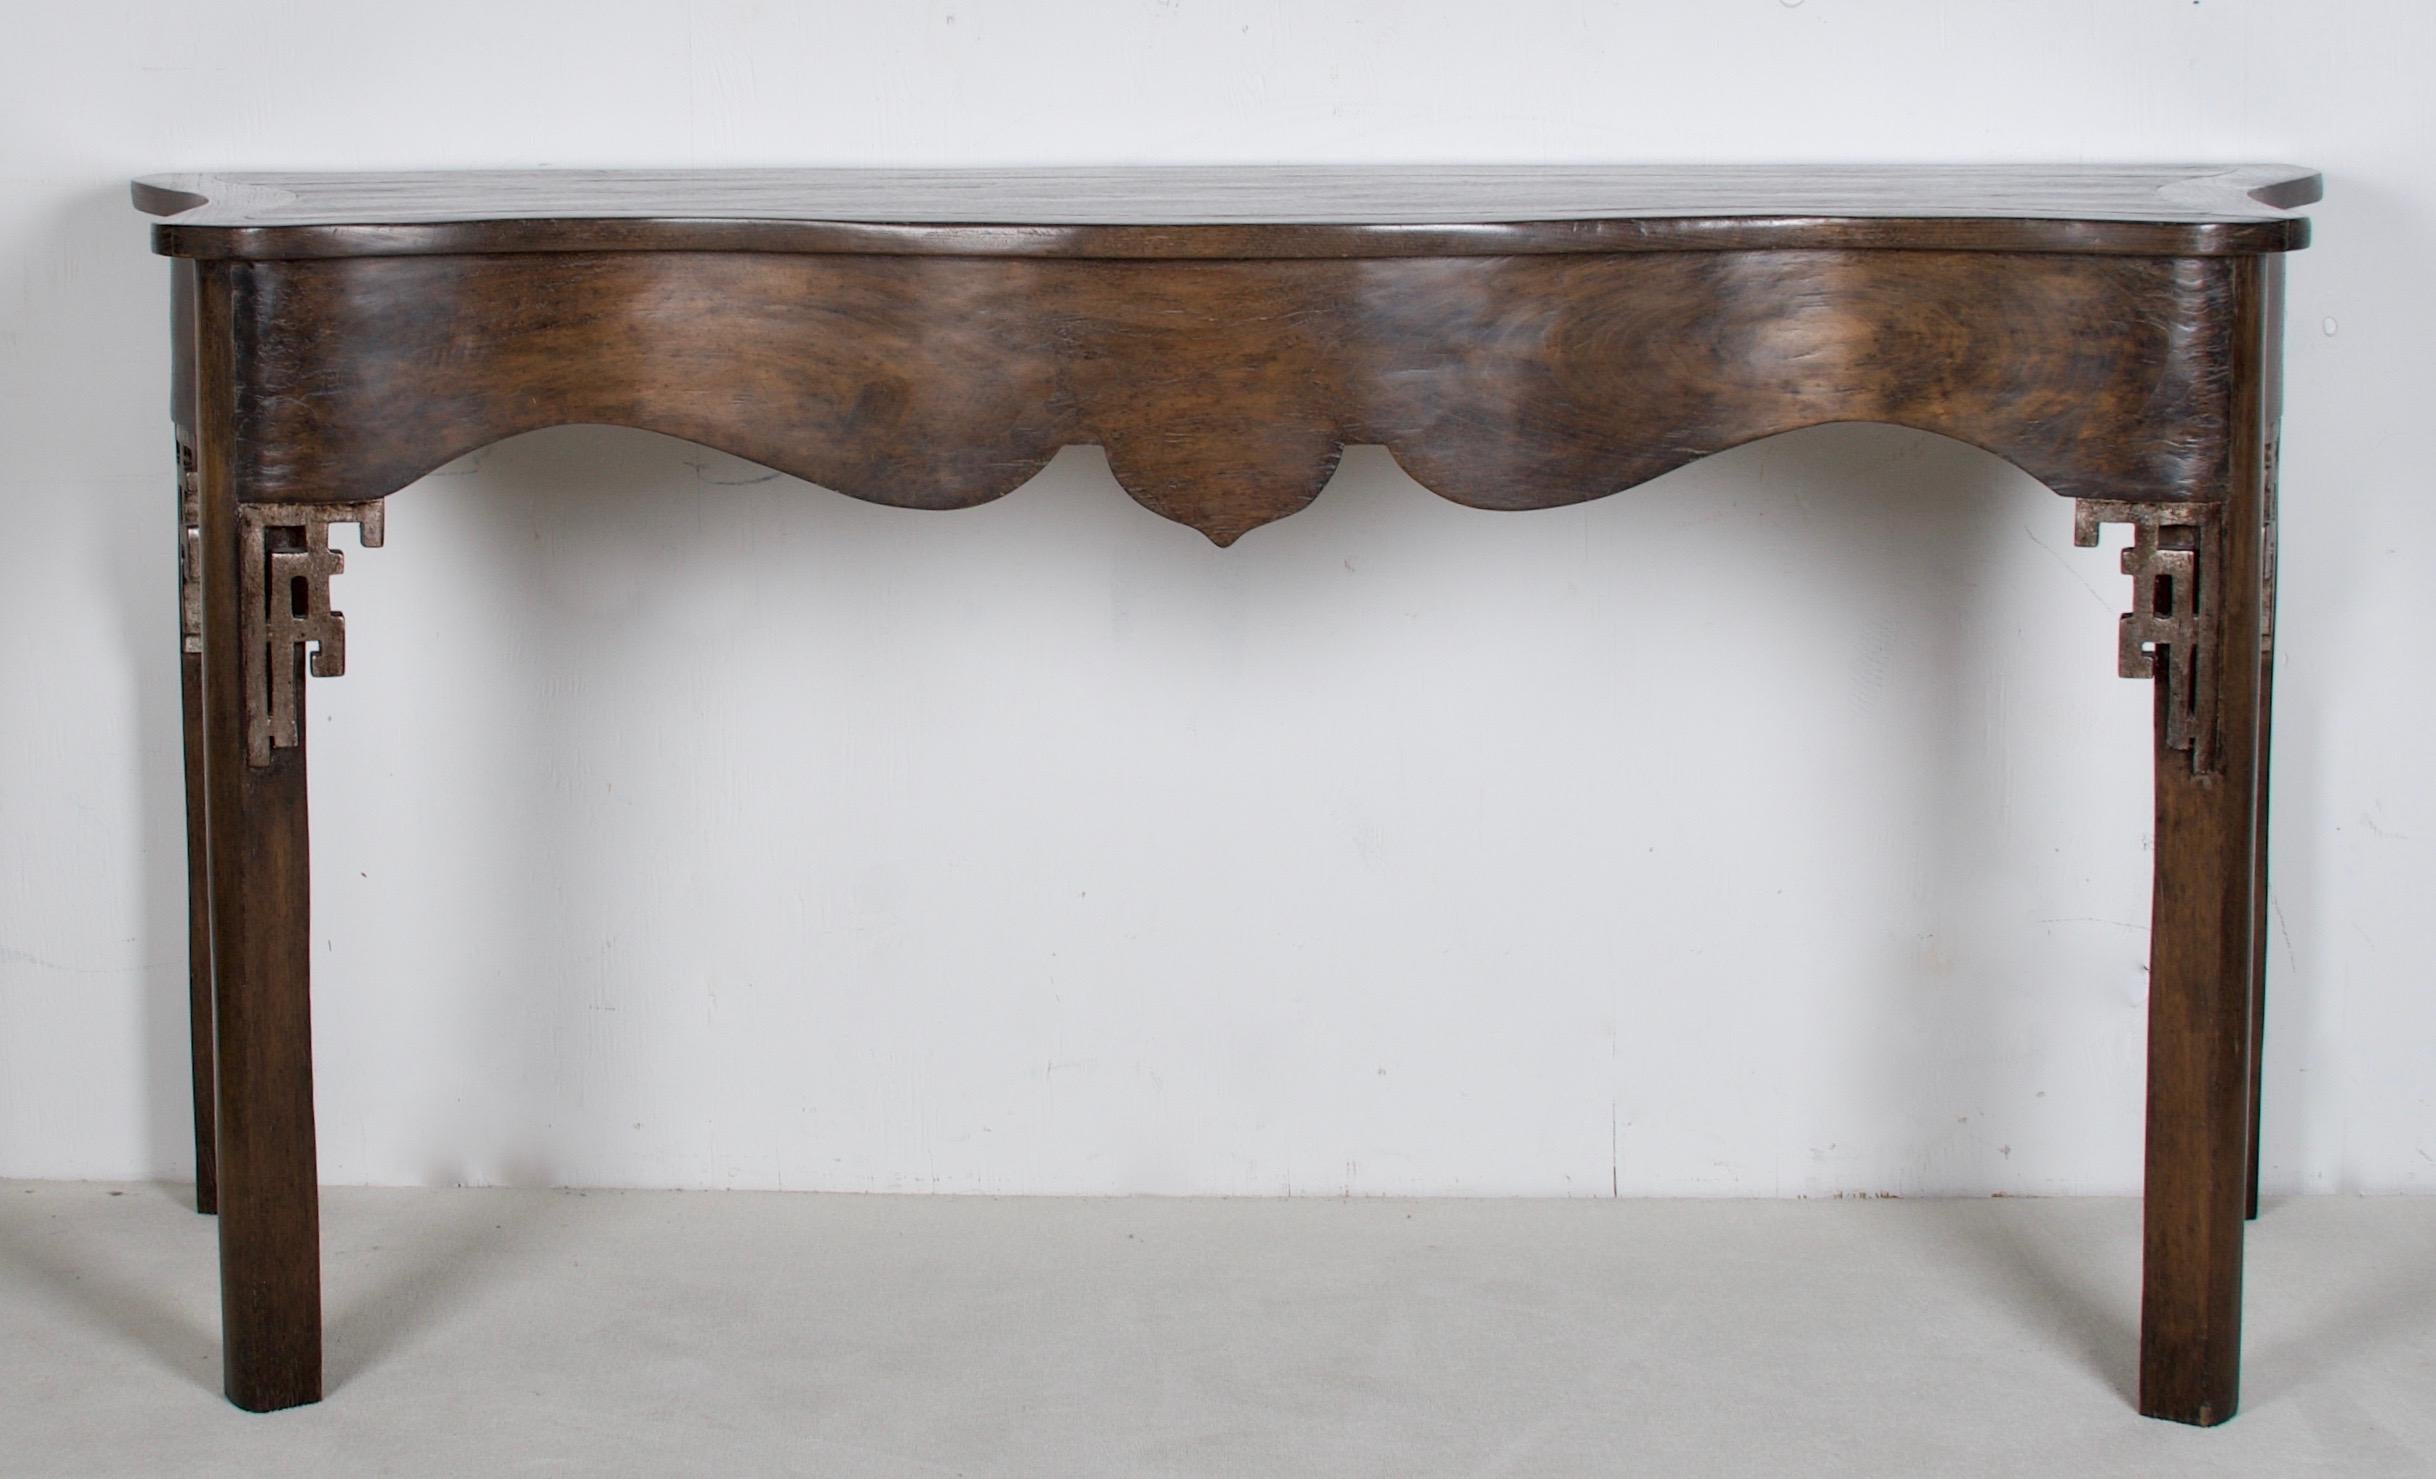 A lovely oak console by a famous interior design showroom.
The console has some oriental design aspects as well as a
serpentine scalloped front. Very beautiful handcrafted piece with
a modern finish.